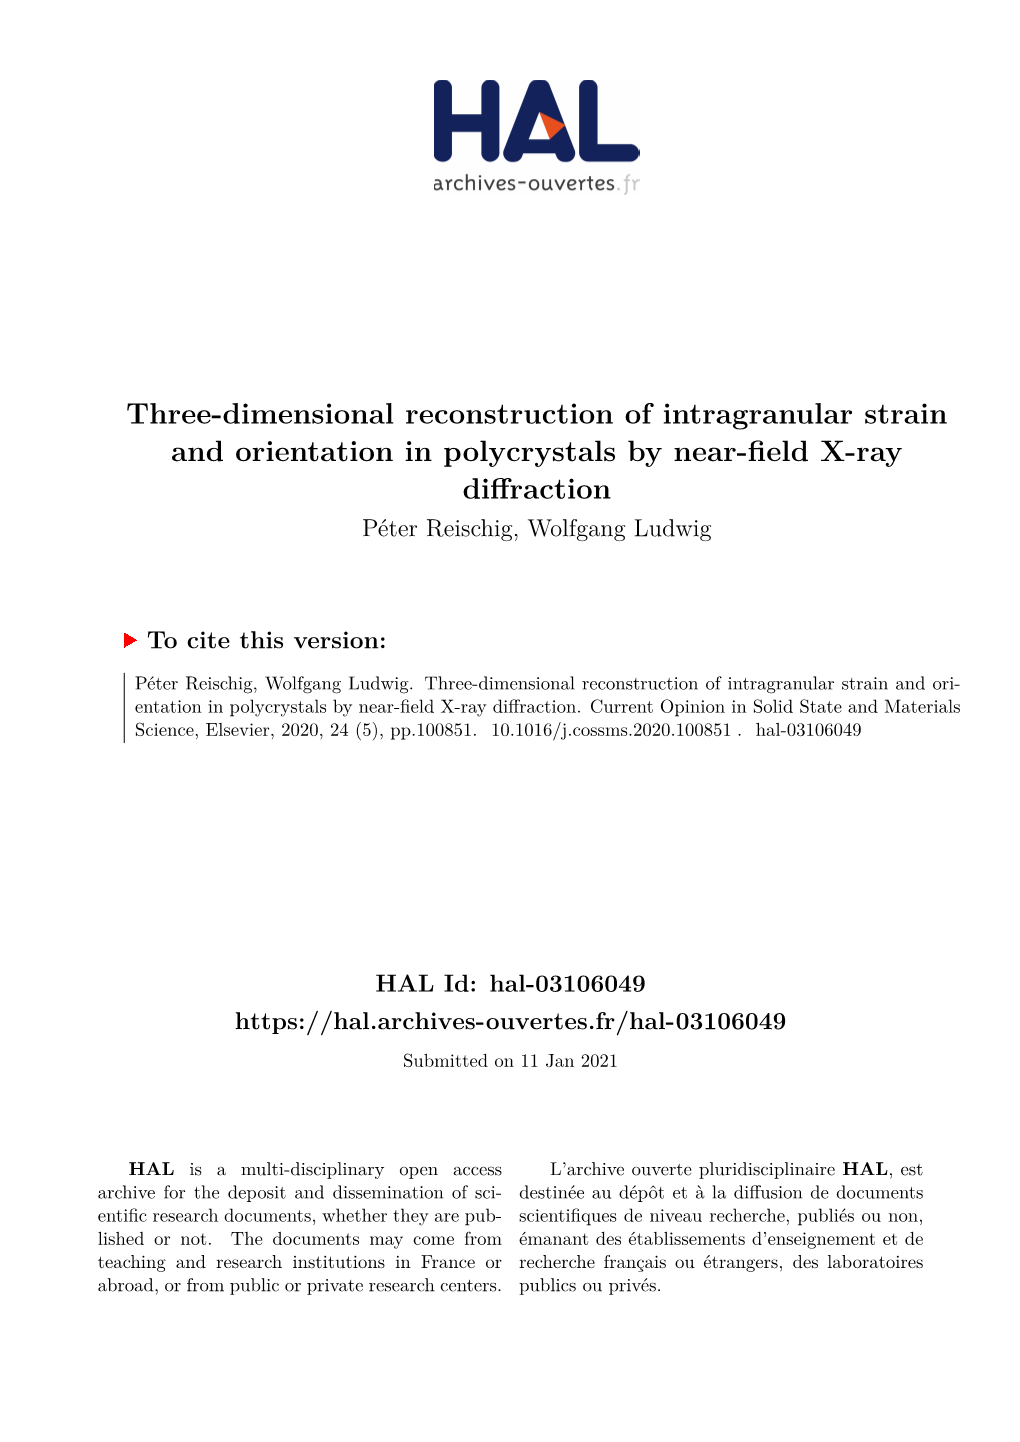 Three-Dimensional Reconstruction of Intragranular Strain and Orientation in Polycrystals by Near-Field X-Ray Diffraction Péter Reischig, Wolfgang Ludwig